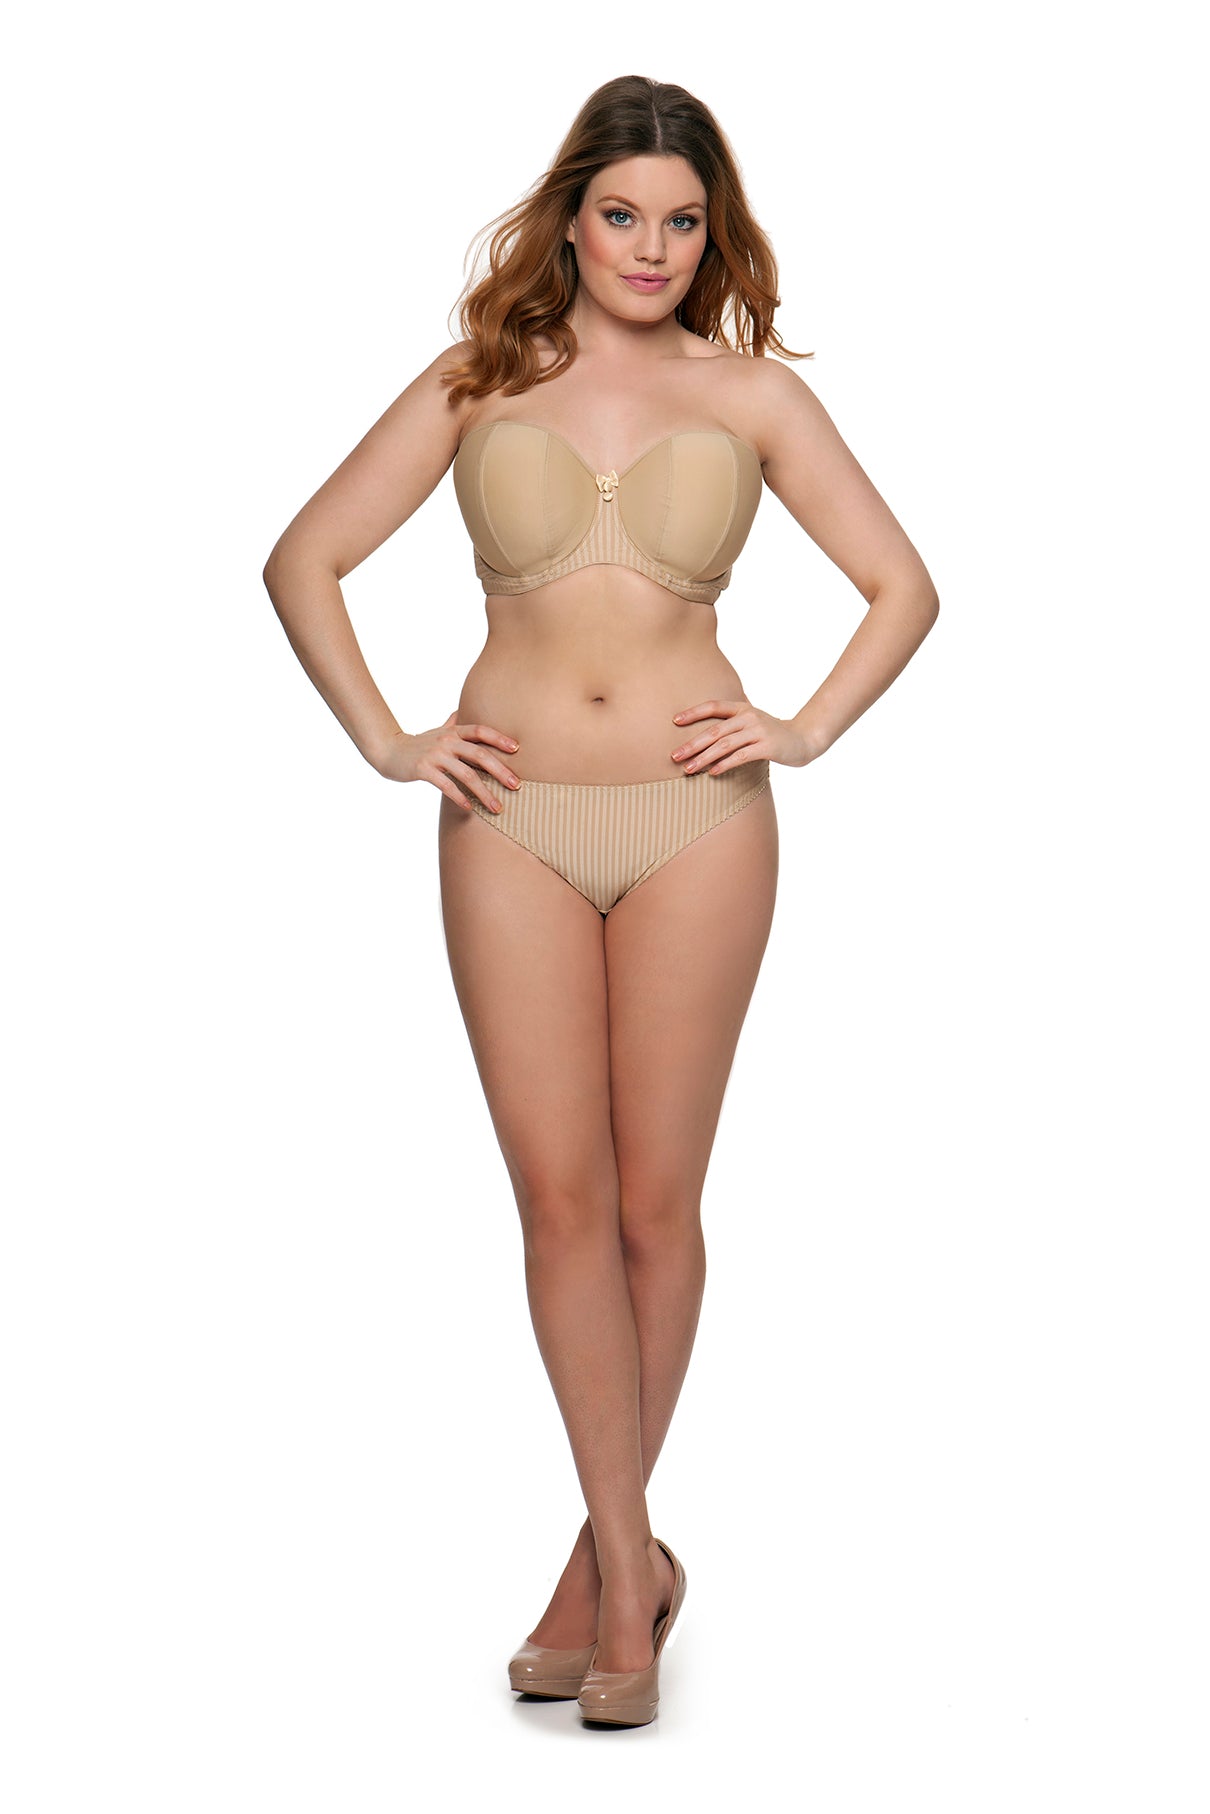 CURVY KATE CK2601 LUXE, STRAPLESS BRA, LARGE CUPS SIZES